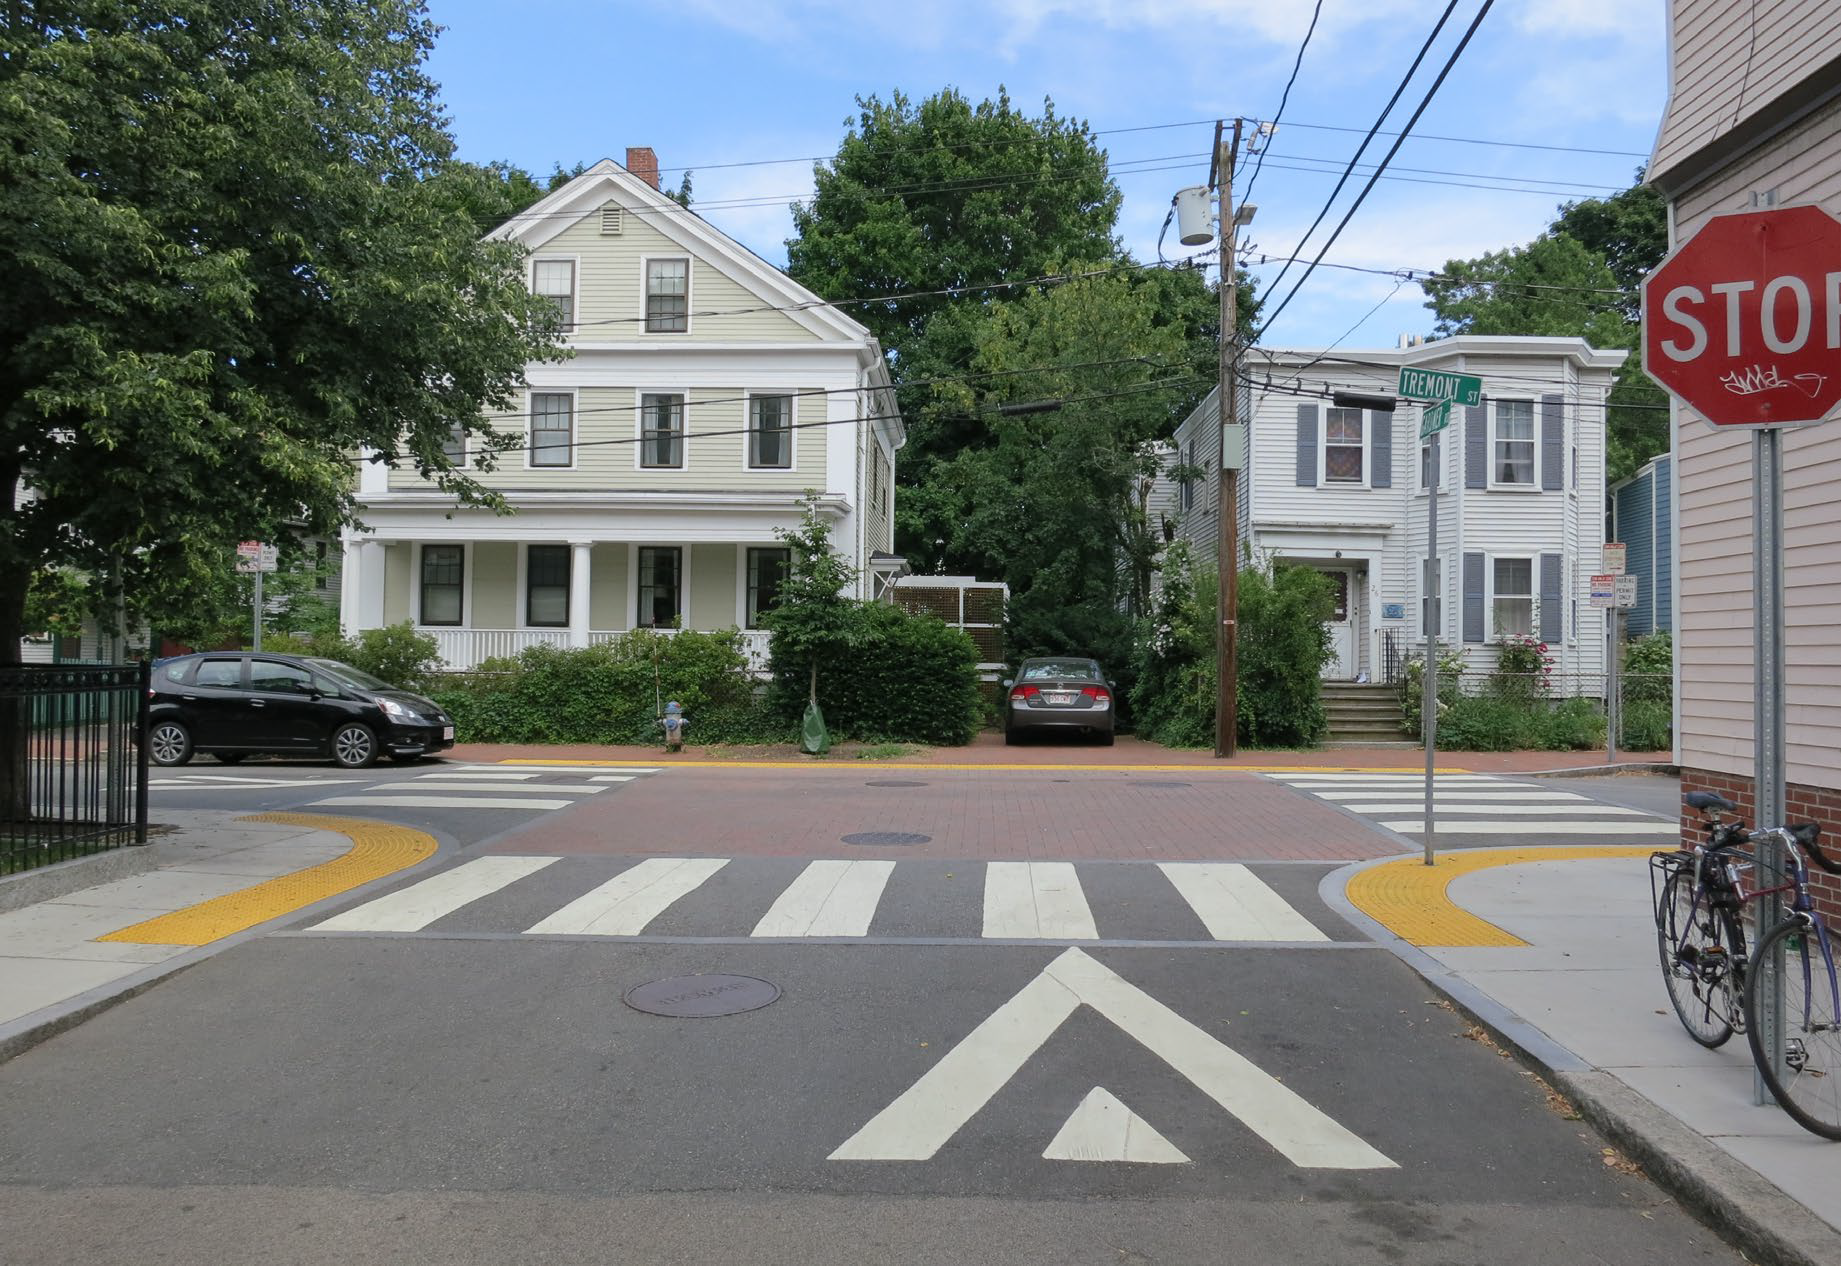 At the point where a street intersects with another, the pavement is raised to the same level as the sidewalks.